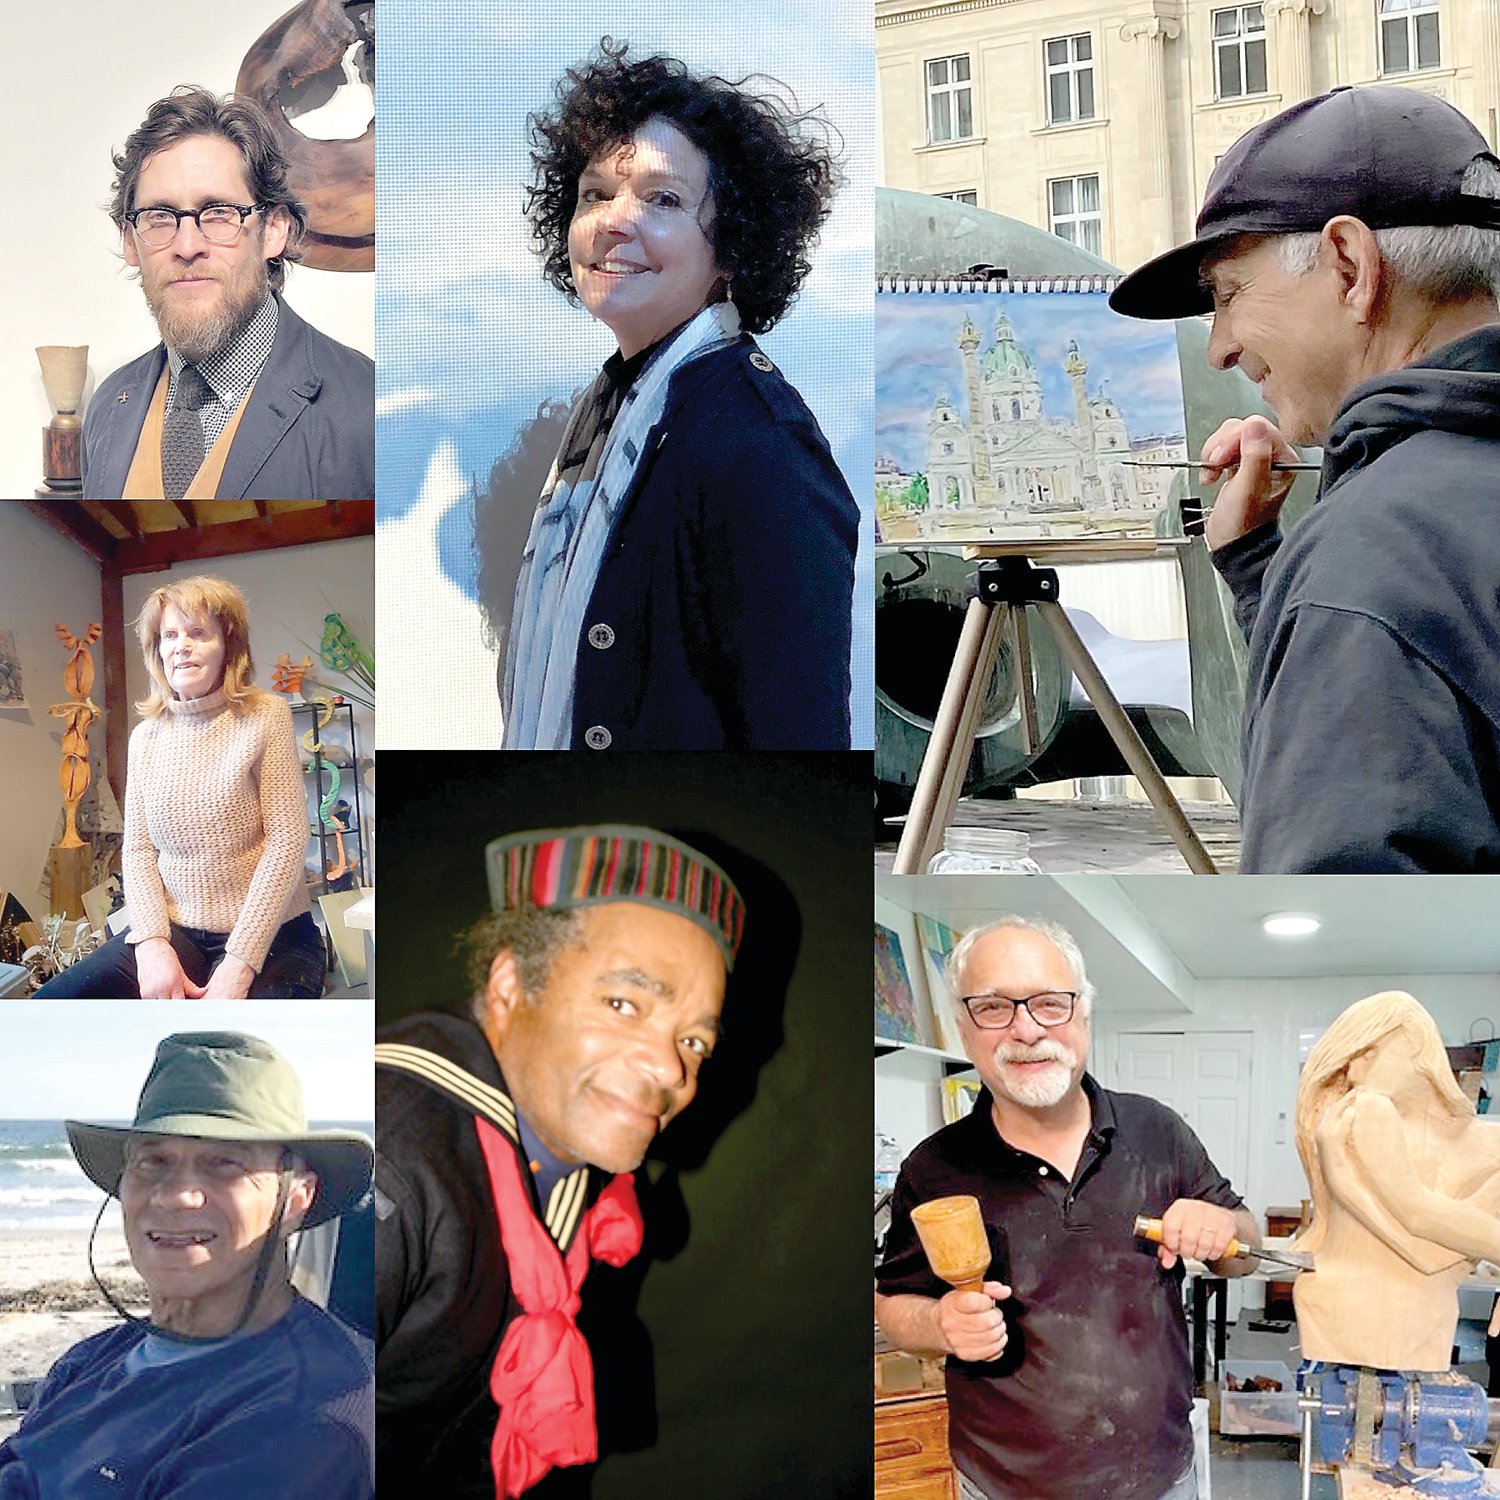 Featured artists, clockwise from upper left, are: C.T. Bray, assemblage creator; Hollis Bauer, jewelry designer; Mike Mann, impressionist/realist painter; Bob Liana, leather/wood sculptor; Danny (Jette) Sailor, surreal photographer; Eugene Patti, abstract/realist painter; and Ruth Jourjine, ceramic sculptor.